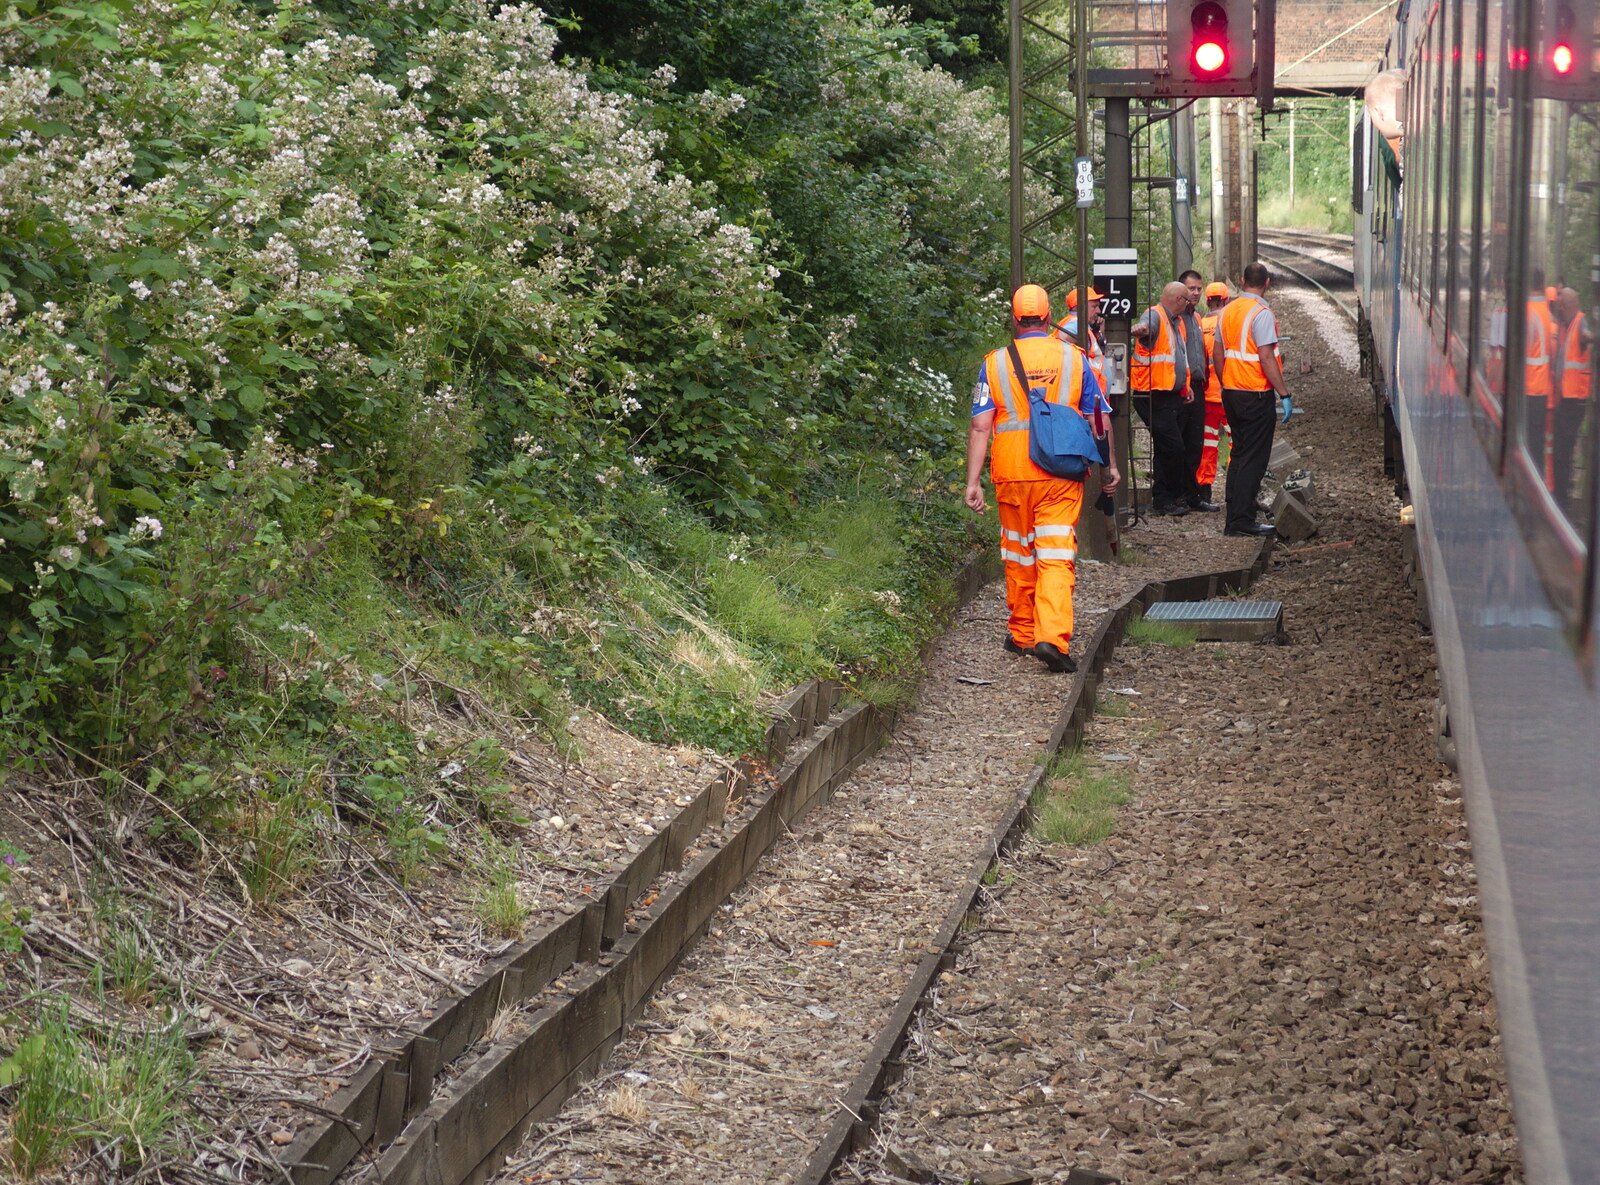 Another Network Rail dude walks down the track from Railway Hell: A Pantograph Story, Chelmsford, Essex - 17th June 2014